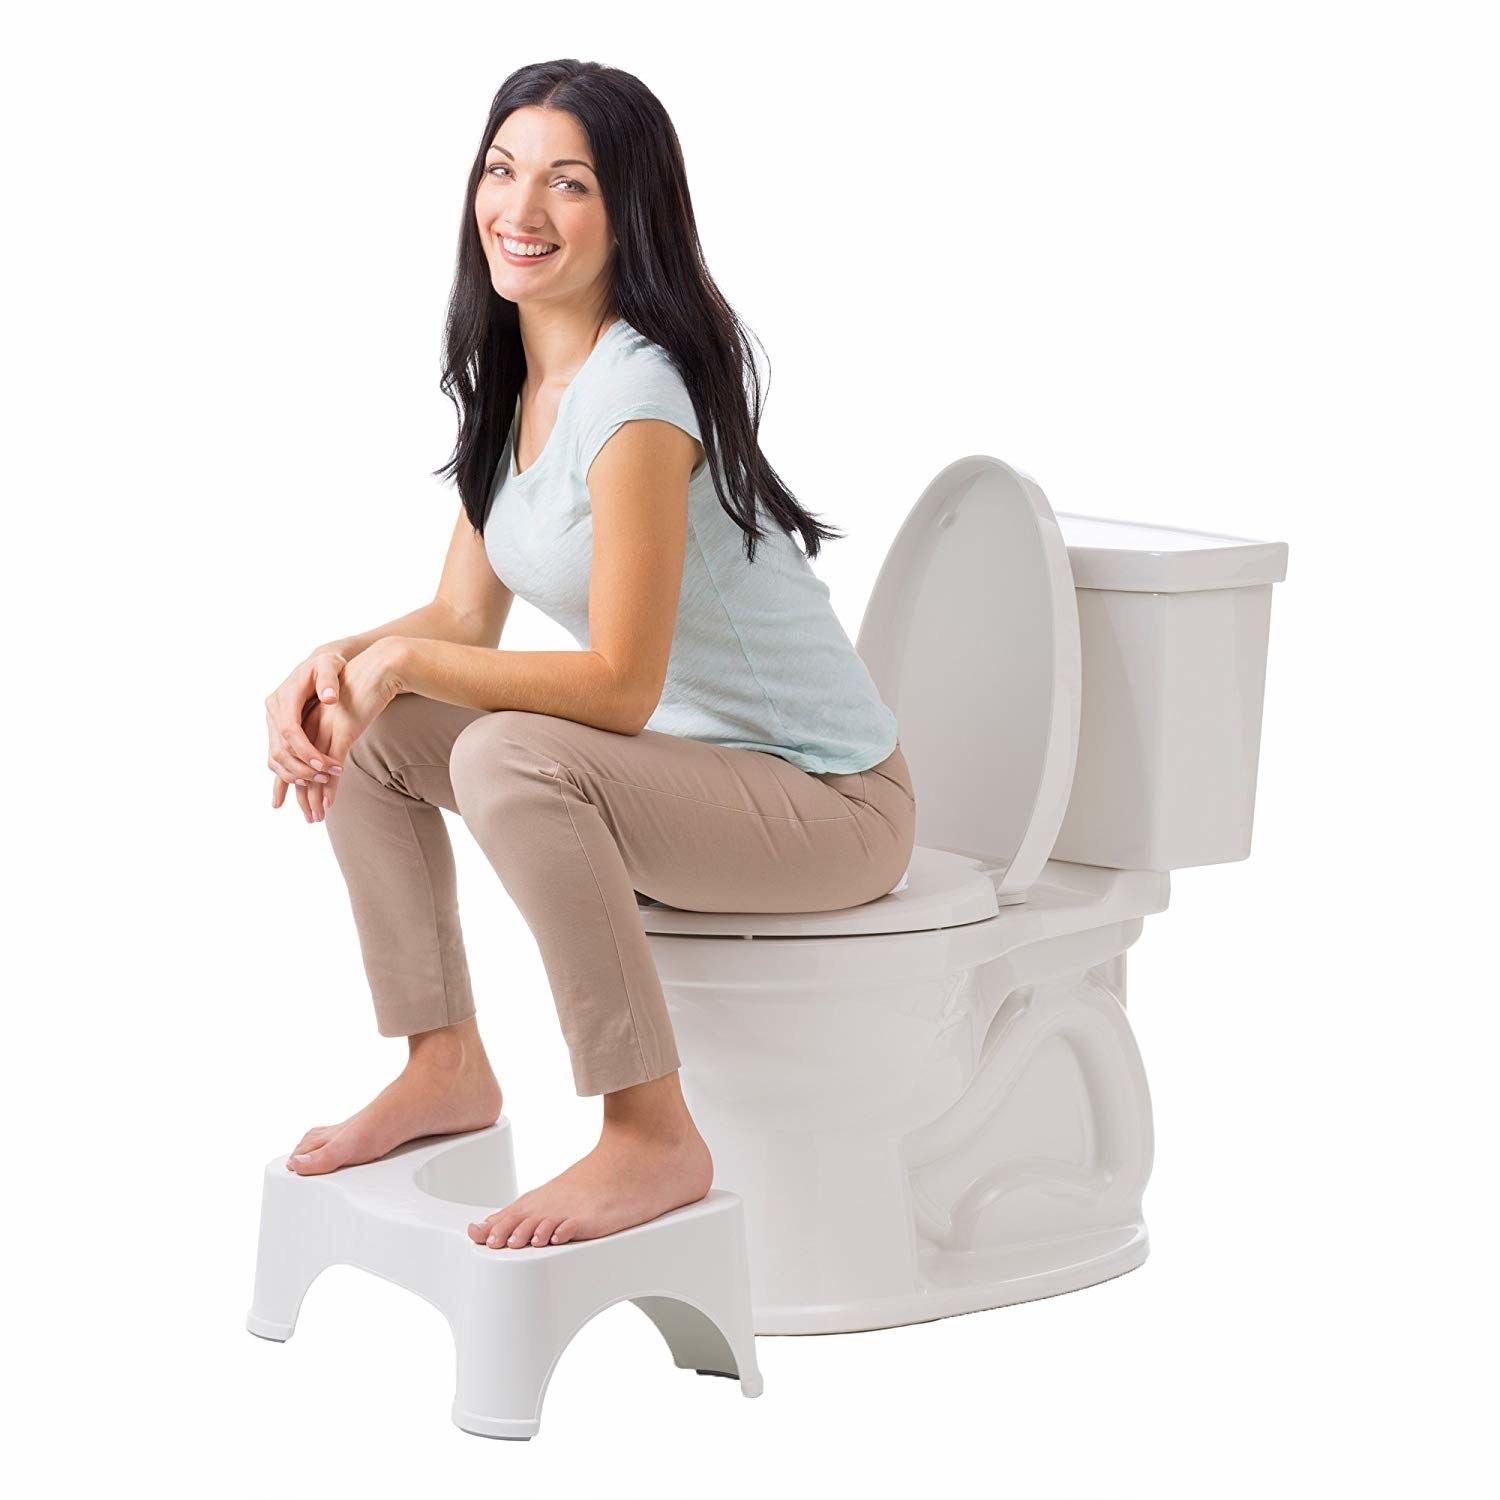 model wearing clothes sitting on a toilet with their feet propped on the stool-like squatty potty